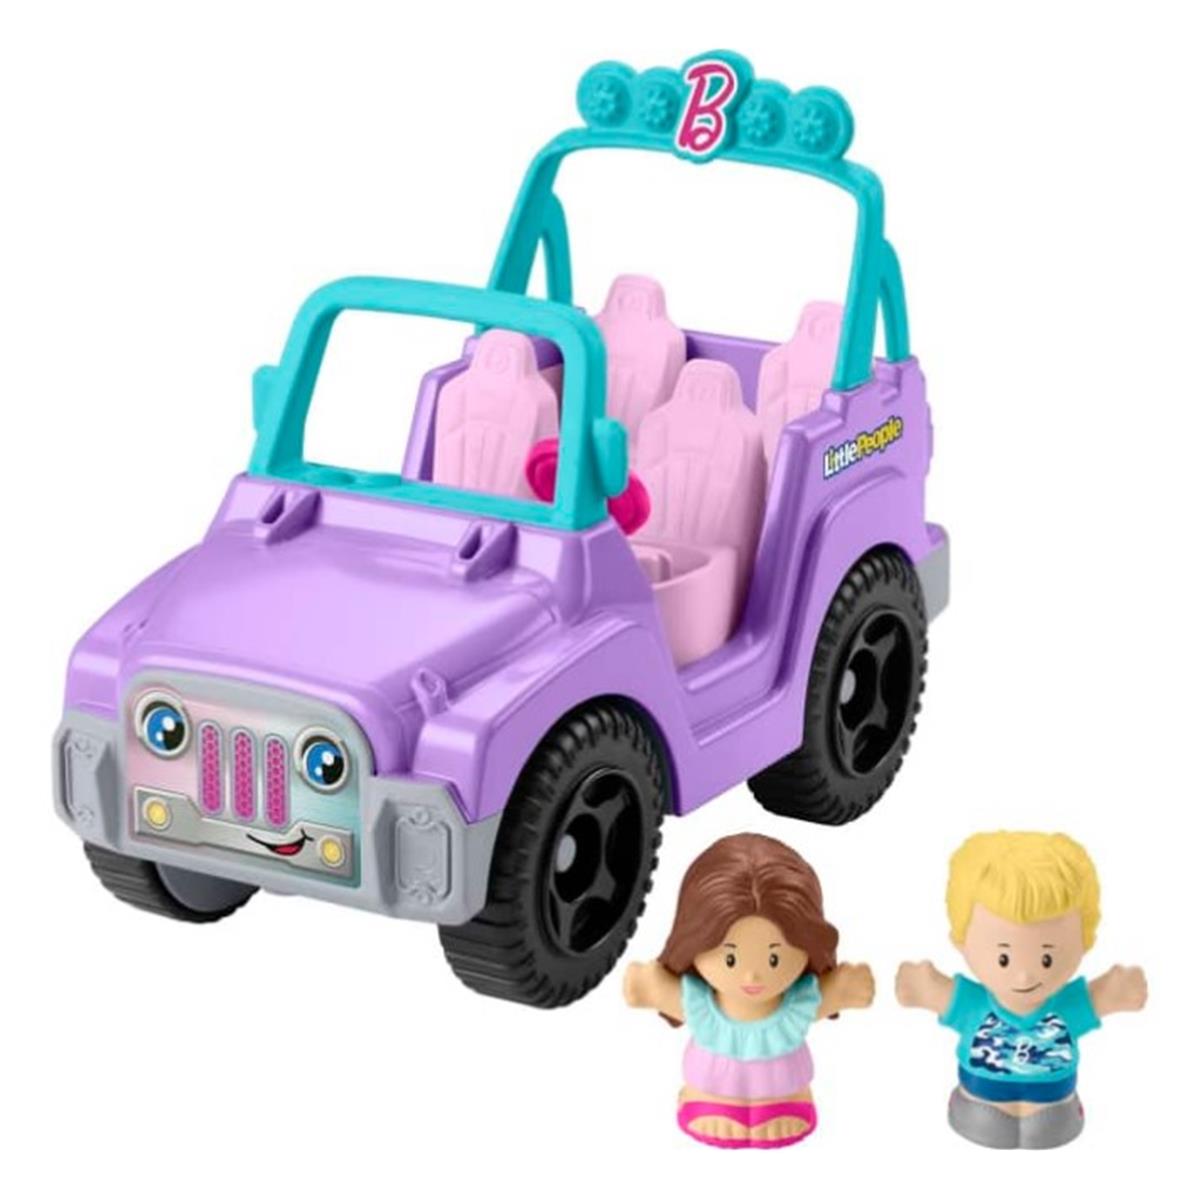 Picture of Fisher-Price MTTHJW77 Little People Barbie Cruiser Toys, Pack of 2